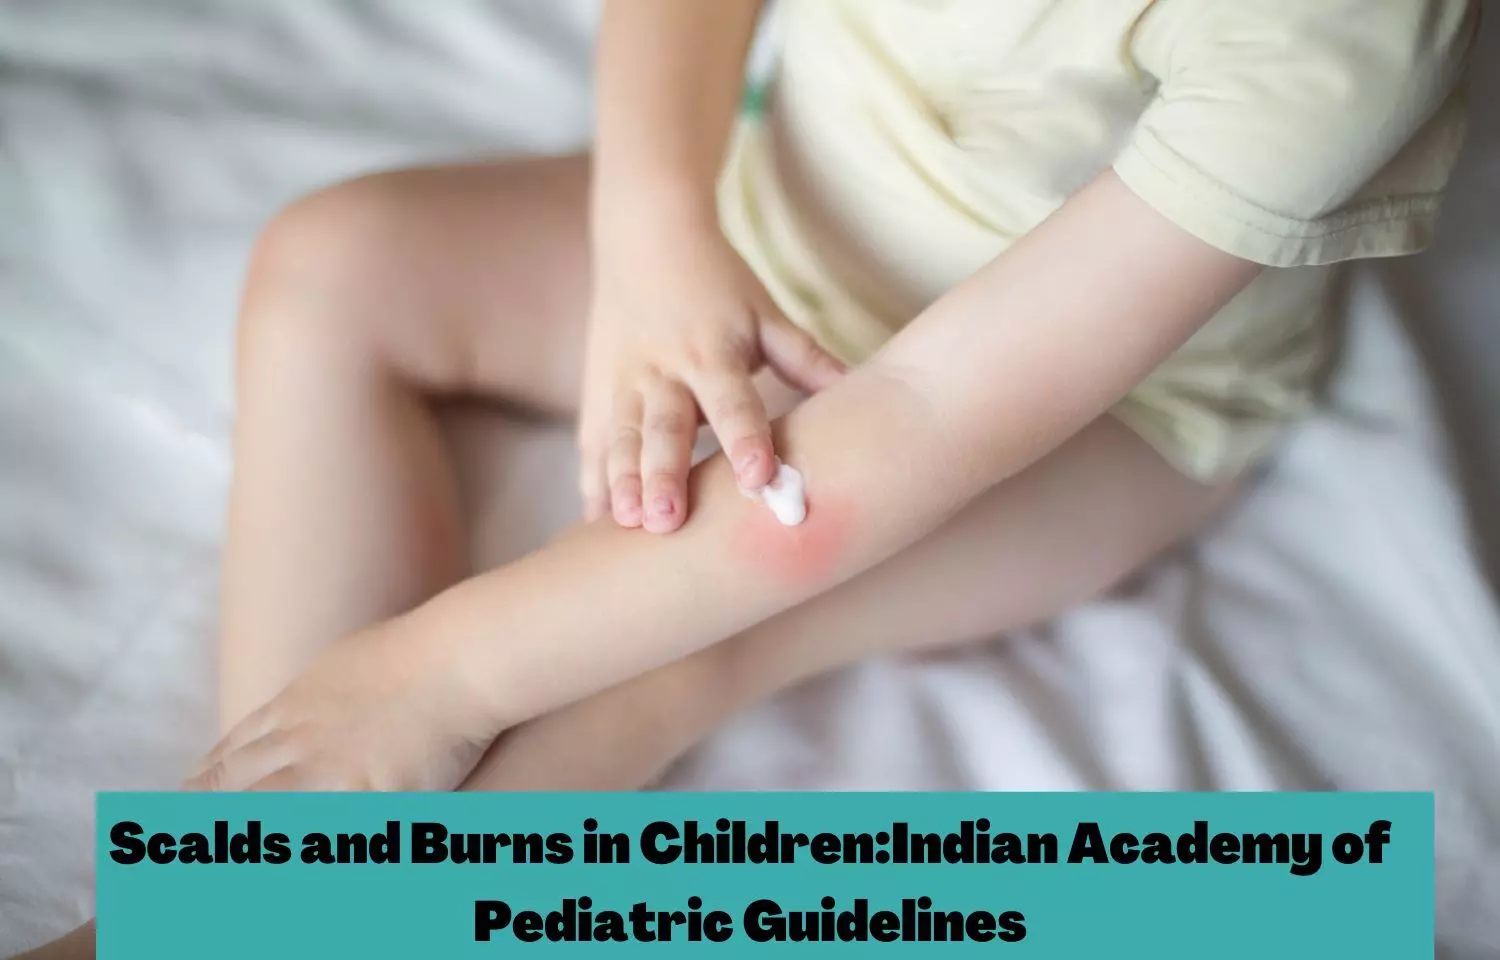 Scalds and Burns in Children: Indian Academy of Pediatric Guidelines